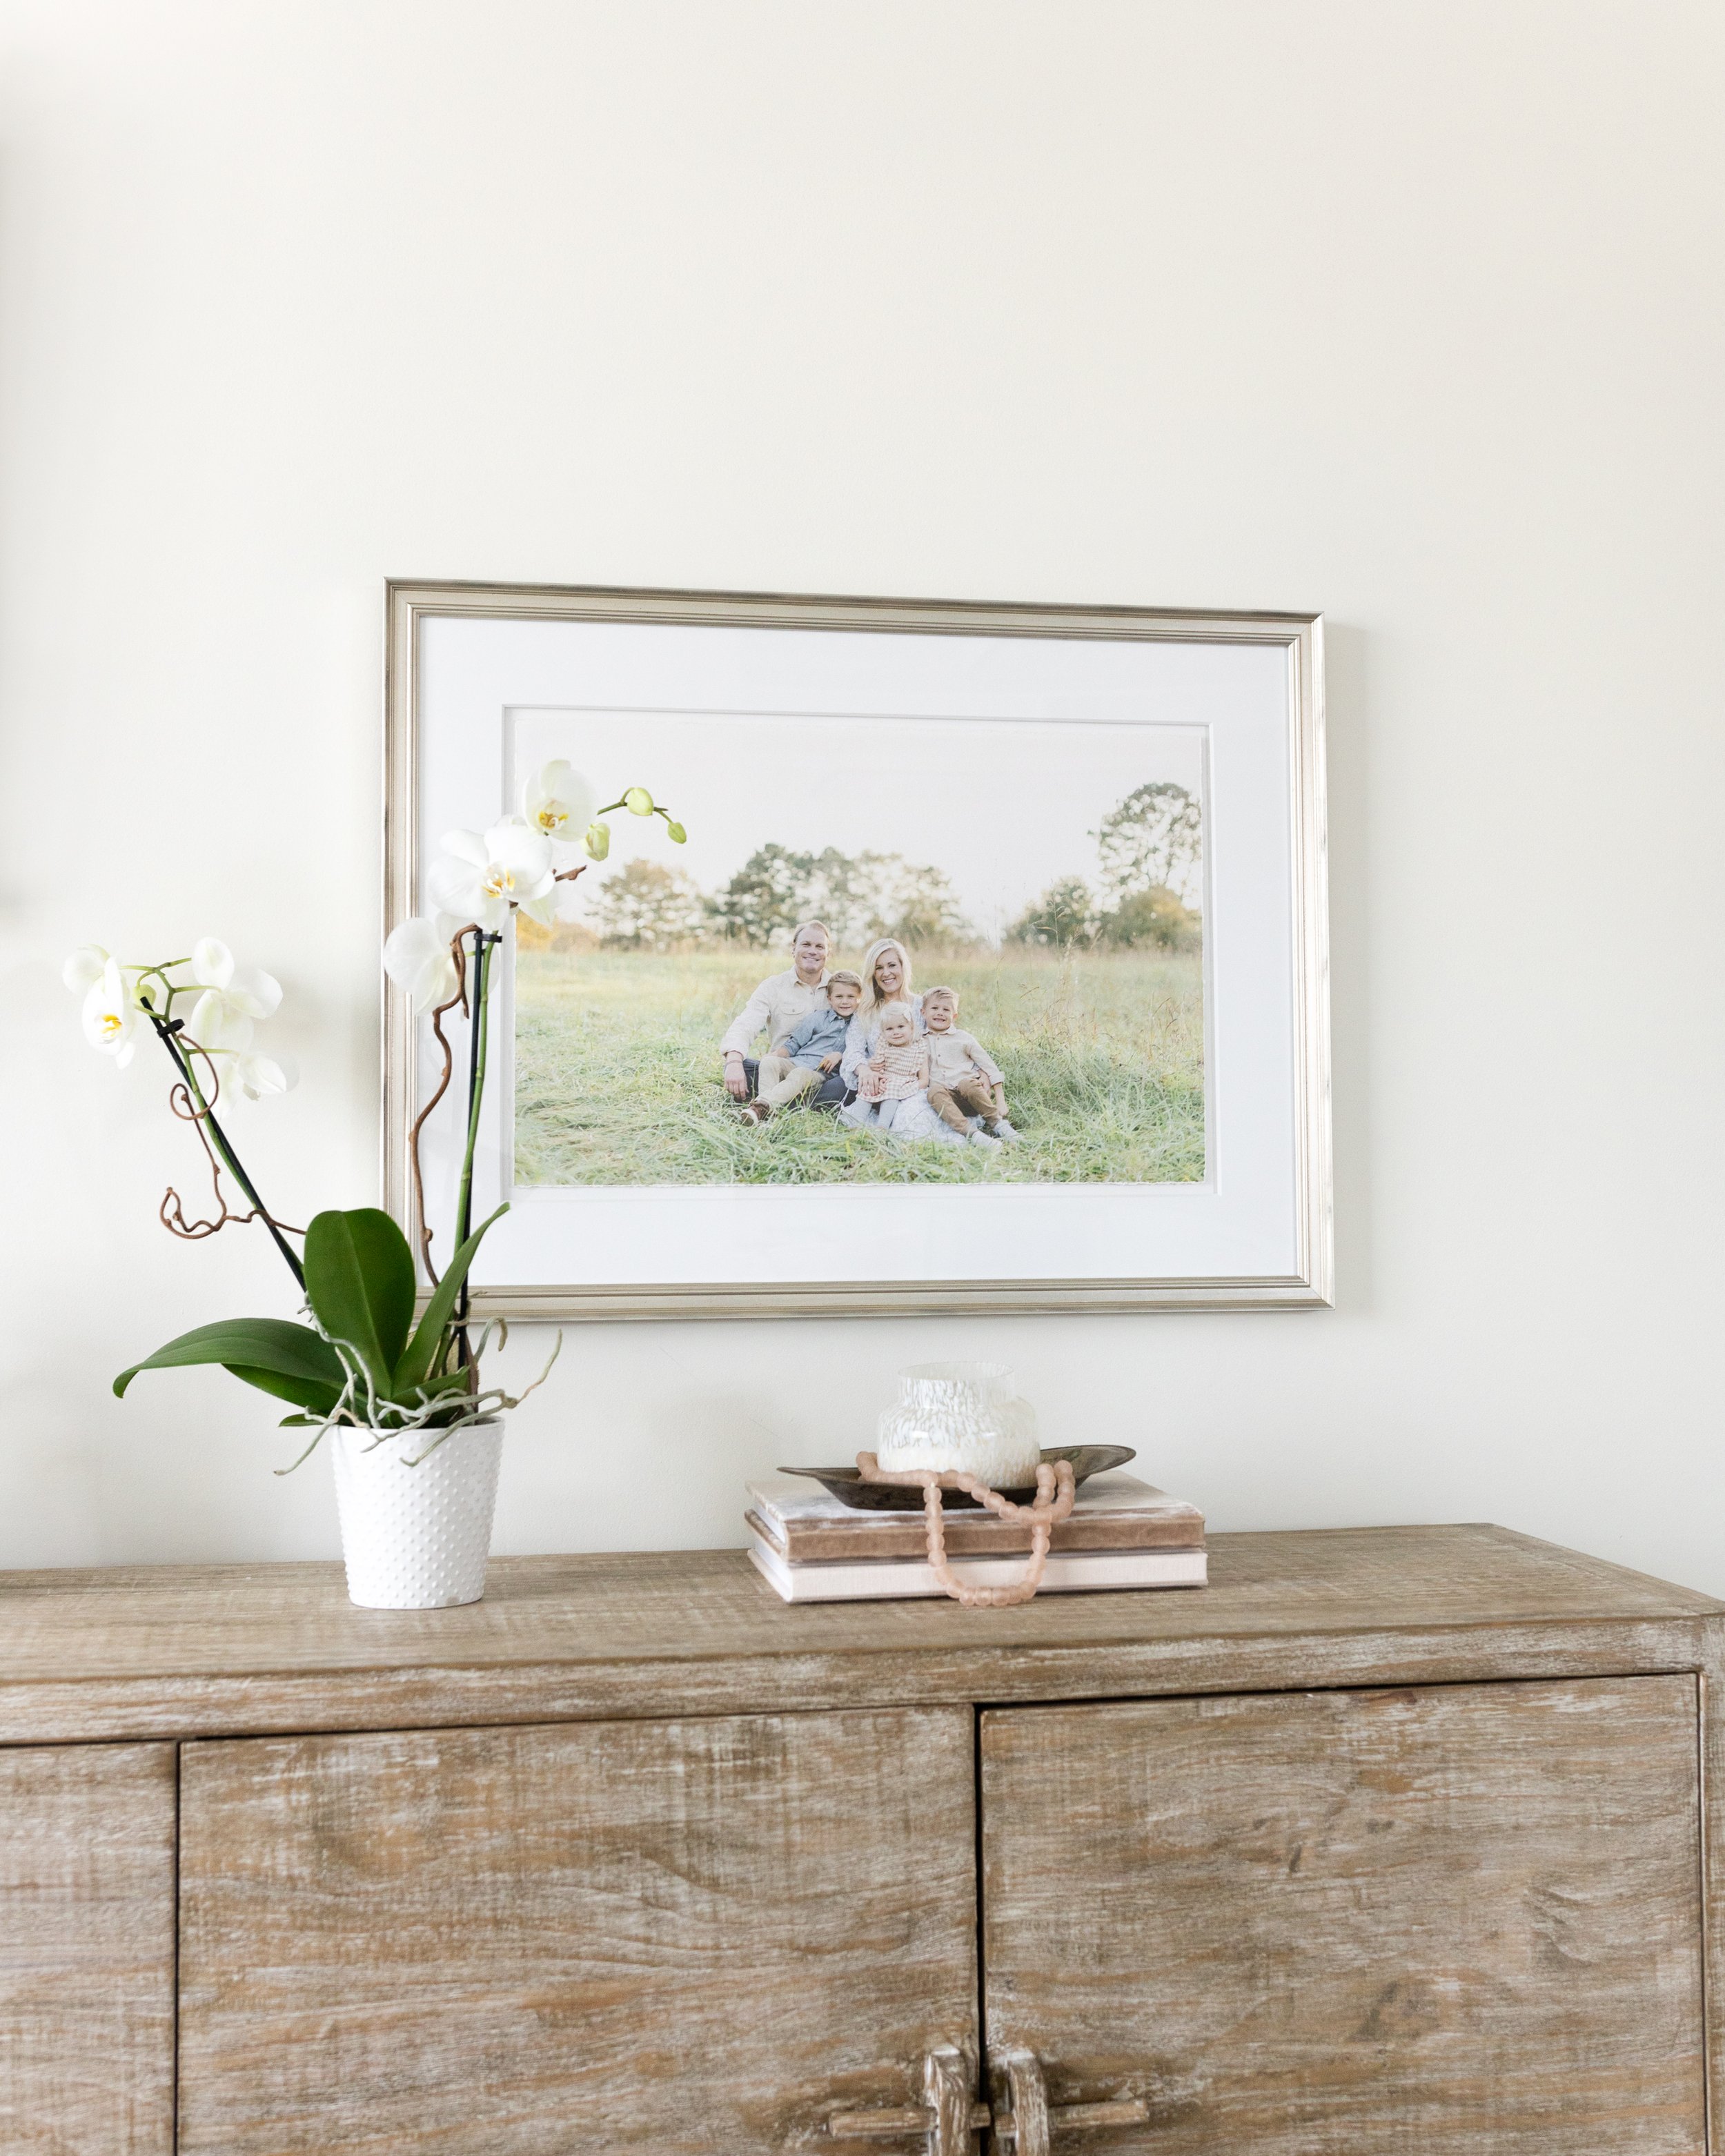   Framed and matted family photo of a family sitting in a field, framed with a classic silver frame and white mat, hung above a console table. #EssexCountyFamilyPhotographer #BergenCountyFamilyPhotographer #NorthernNewJerseyFamilyPhotographer #Manhat